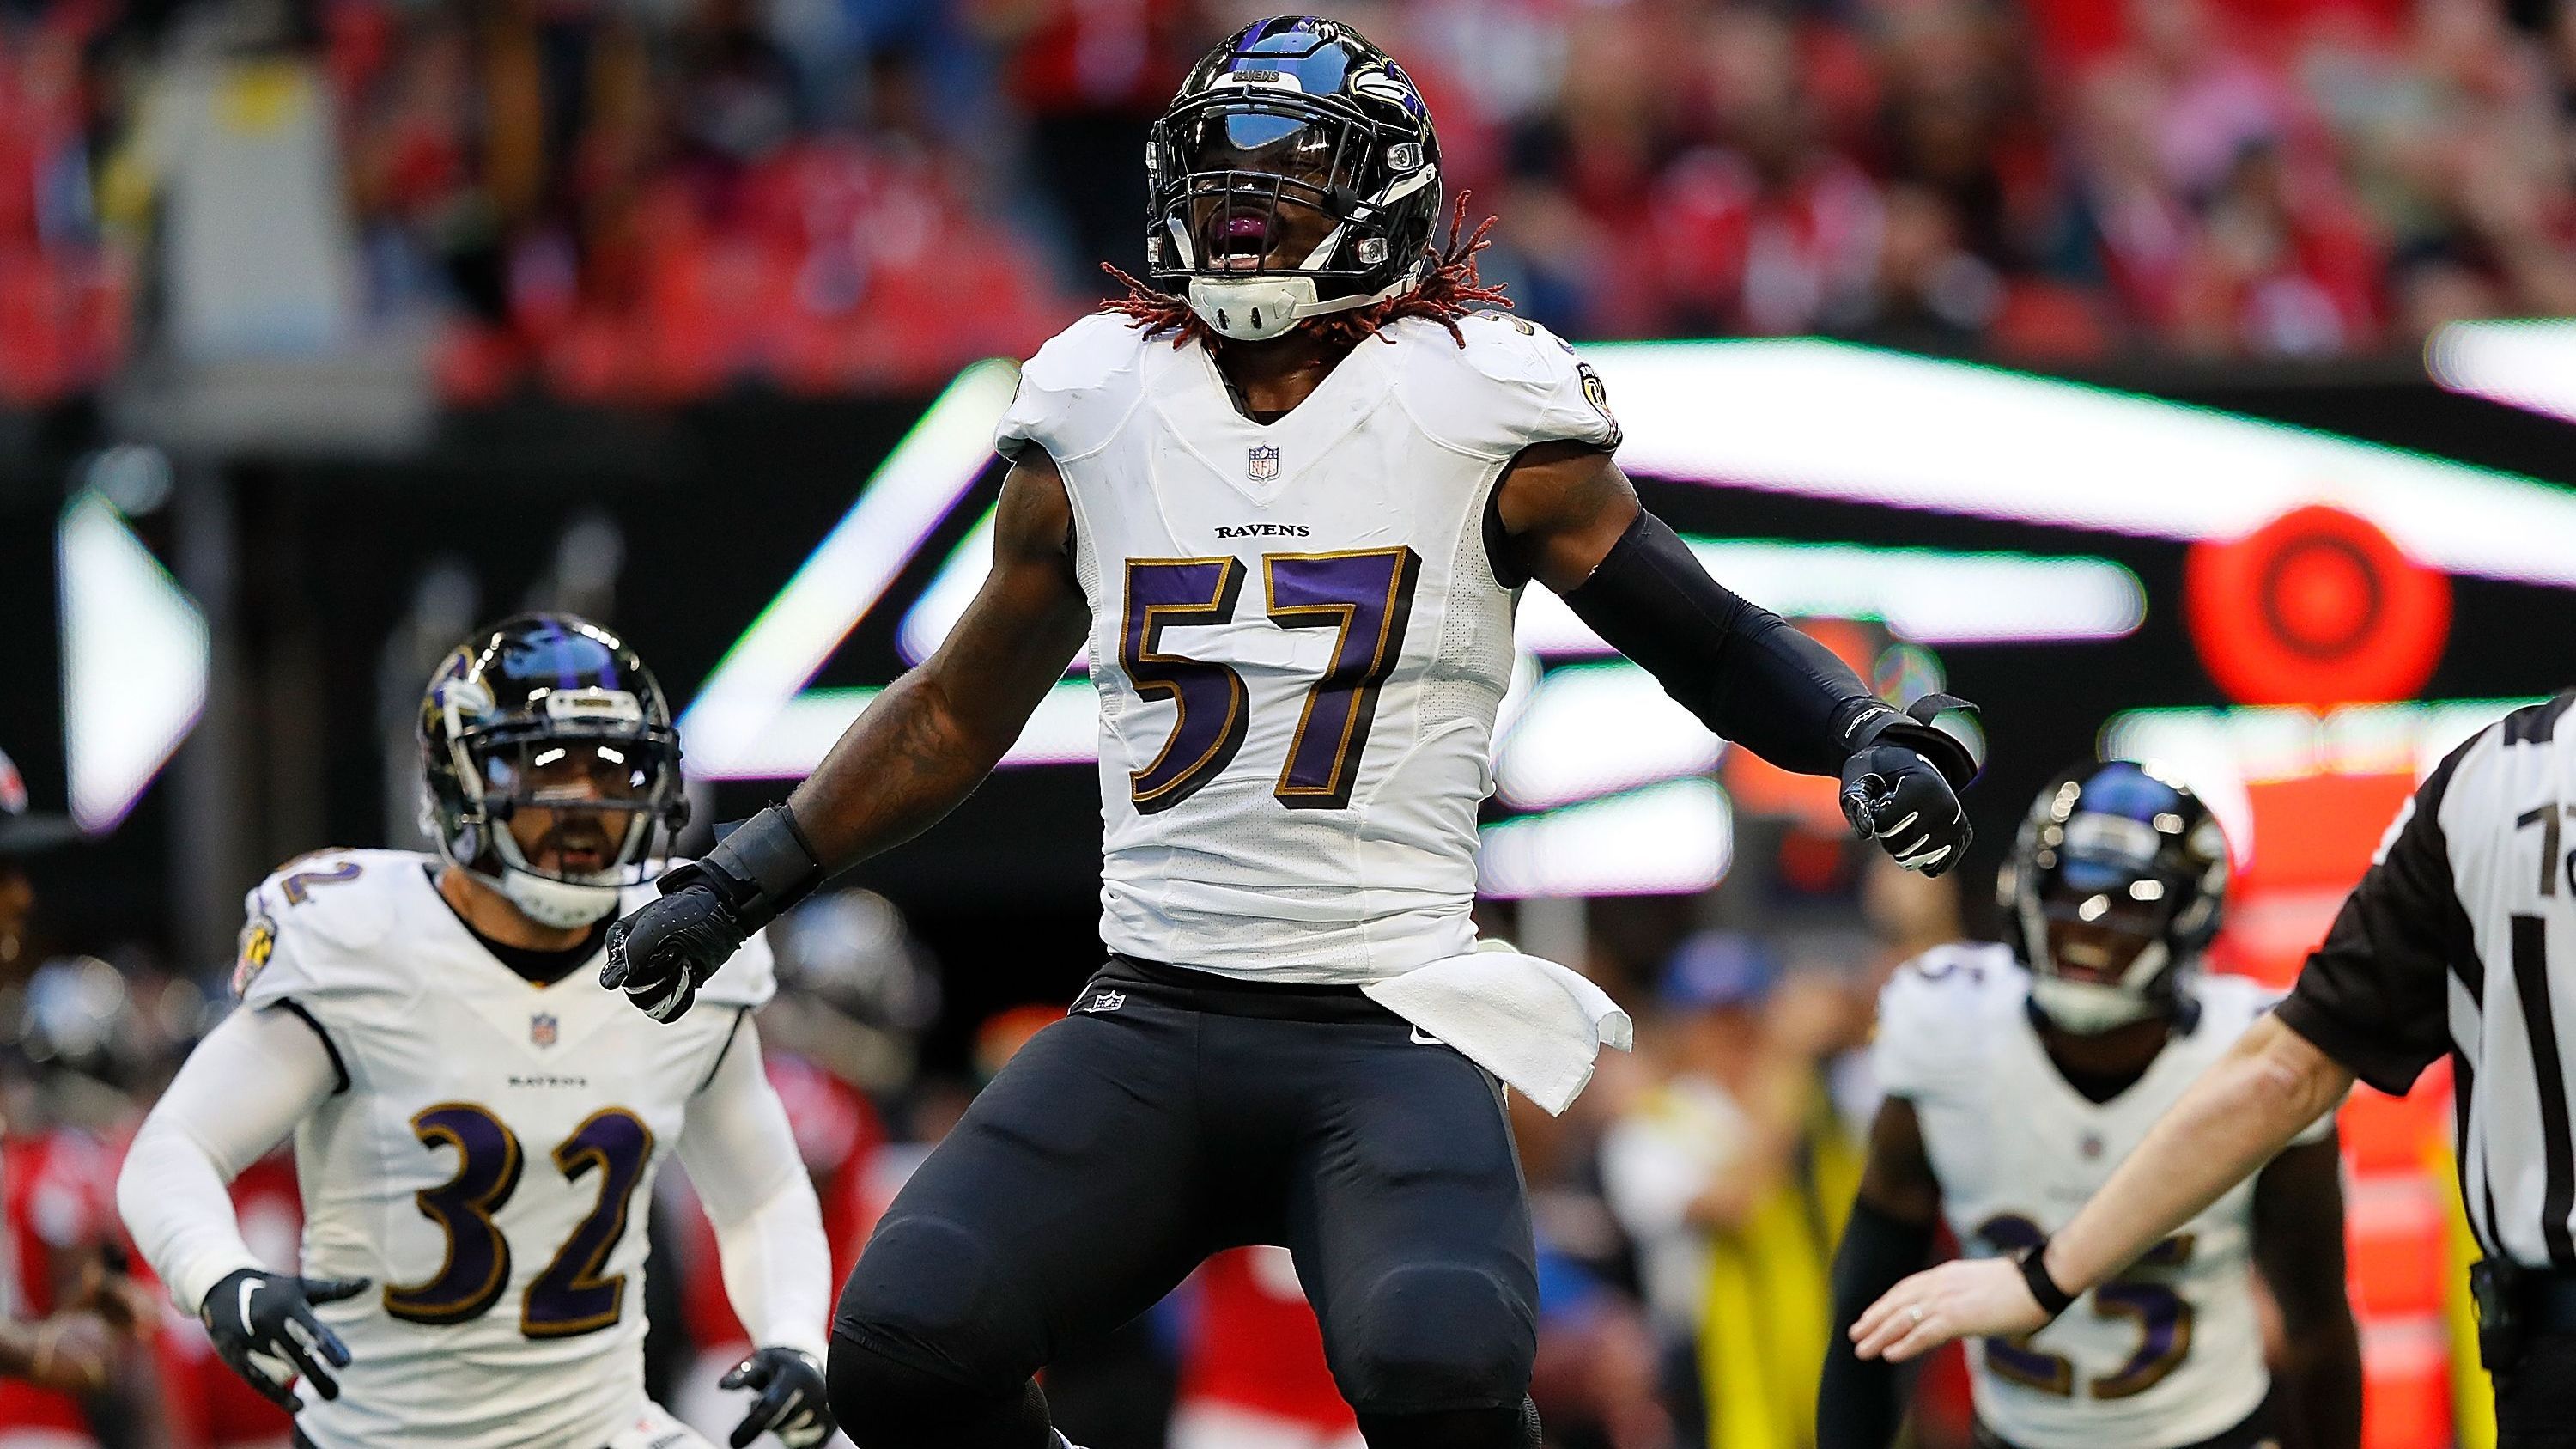 <strong>Platz 2: Baltimore Ravens - 12</strong><br>C.J. Mosley (2014) - 4 Pro Bowls<br>Mark Andrews (2018) - 3 Pro Bowls<br>Marlon Humphrey (2017) - 3 Pro Bowls<br>Lamar Jackson (2018) - 3 Pro Bowls<br>Orlando Brown Jr. (2018) - 2 Pro Bowls<br>Devin Duvernay (2020) - 2 Pro Bowls<br>Matt Judon (2016) - 2 Pro Bowls<br>Kyle Hamilton (2022) - 1 Pro Bowl<br>Tyler Linderbaum (2022) - 1 Pro Bowl<br>Justin Madubuike (2020) - 1 Pro Bowl<br>Patrick Queen (2020) - 1 Pro Bowl<br>Ronnie Stanley (2016) - 1 Pro Bowl